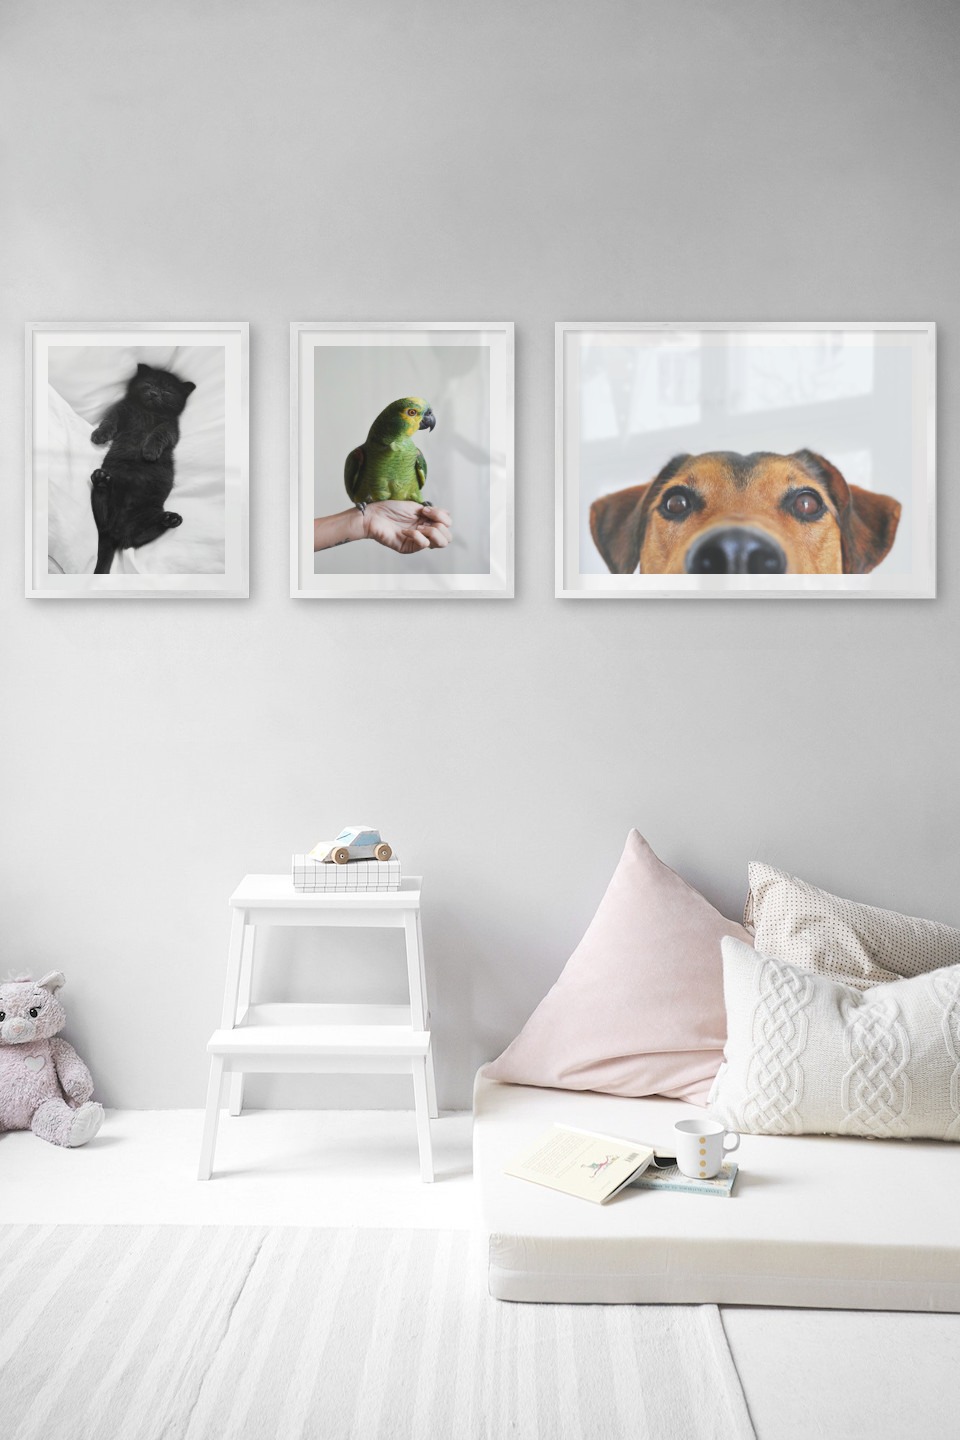 Gallery wall with picture frames in silver in sizes 40x50 and 50x70 with prints "Cat in bed", "Green parrot" and "Hundnos"